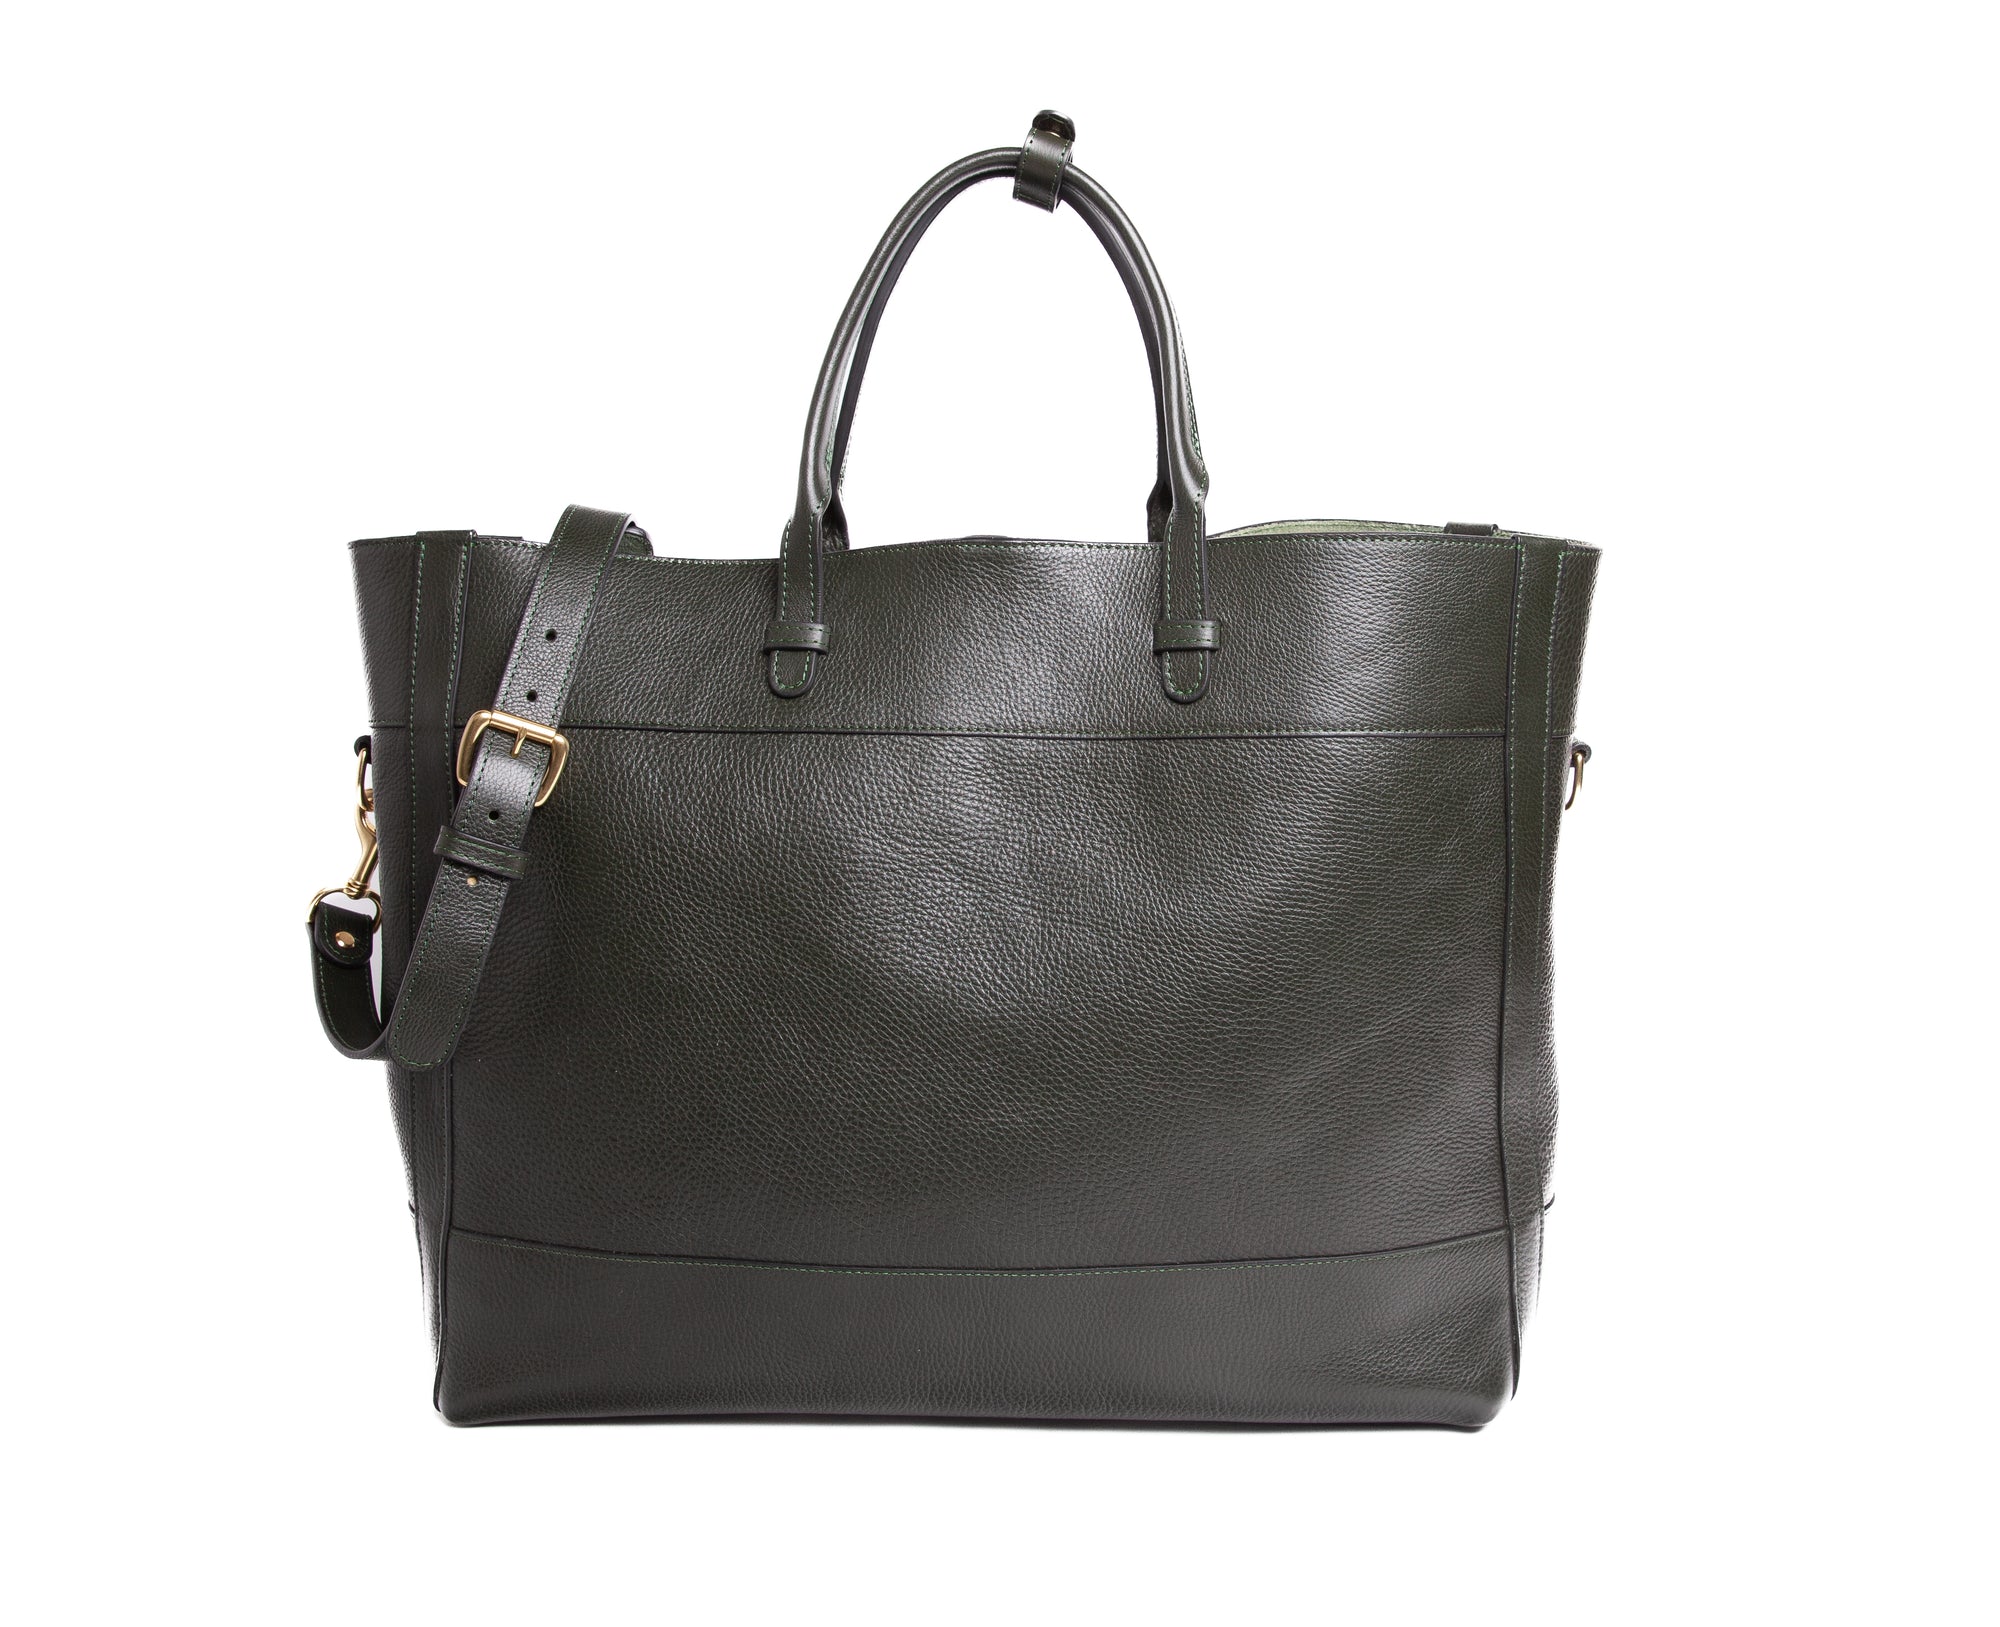 The 929 Tote Green